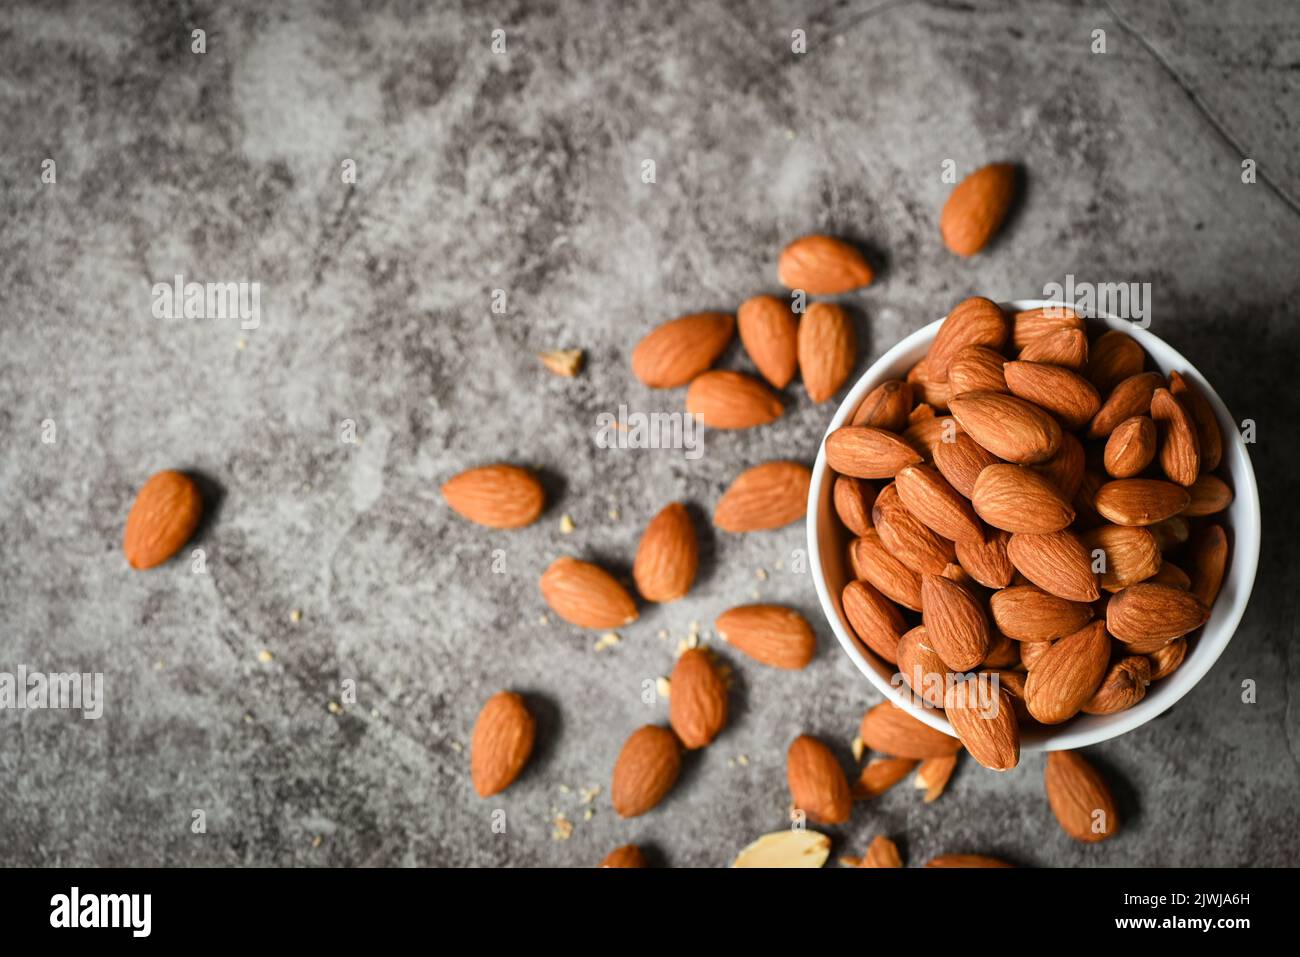 Almonds nuts on white bowl, Delicious sweet almonds on the table dark background, roasted almond nut for healthy food and snack Stock Photo